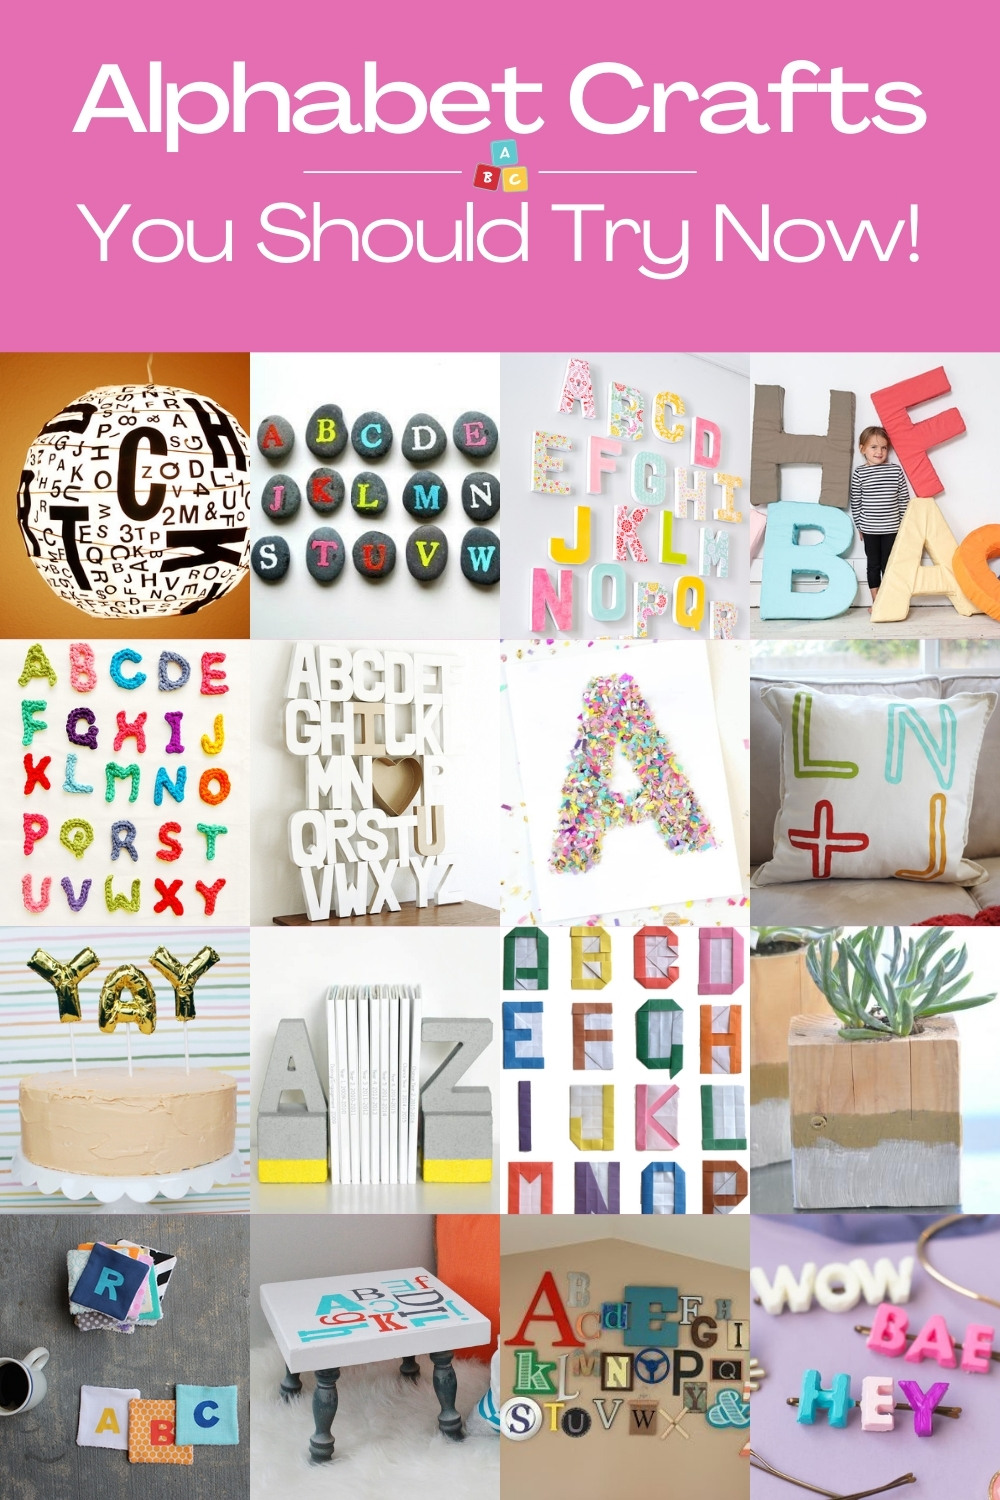 Alphabet Crafts You Should Try Now